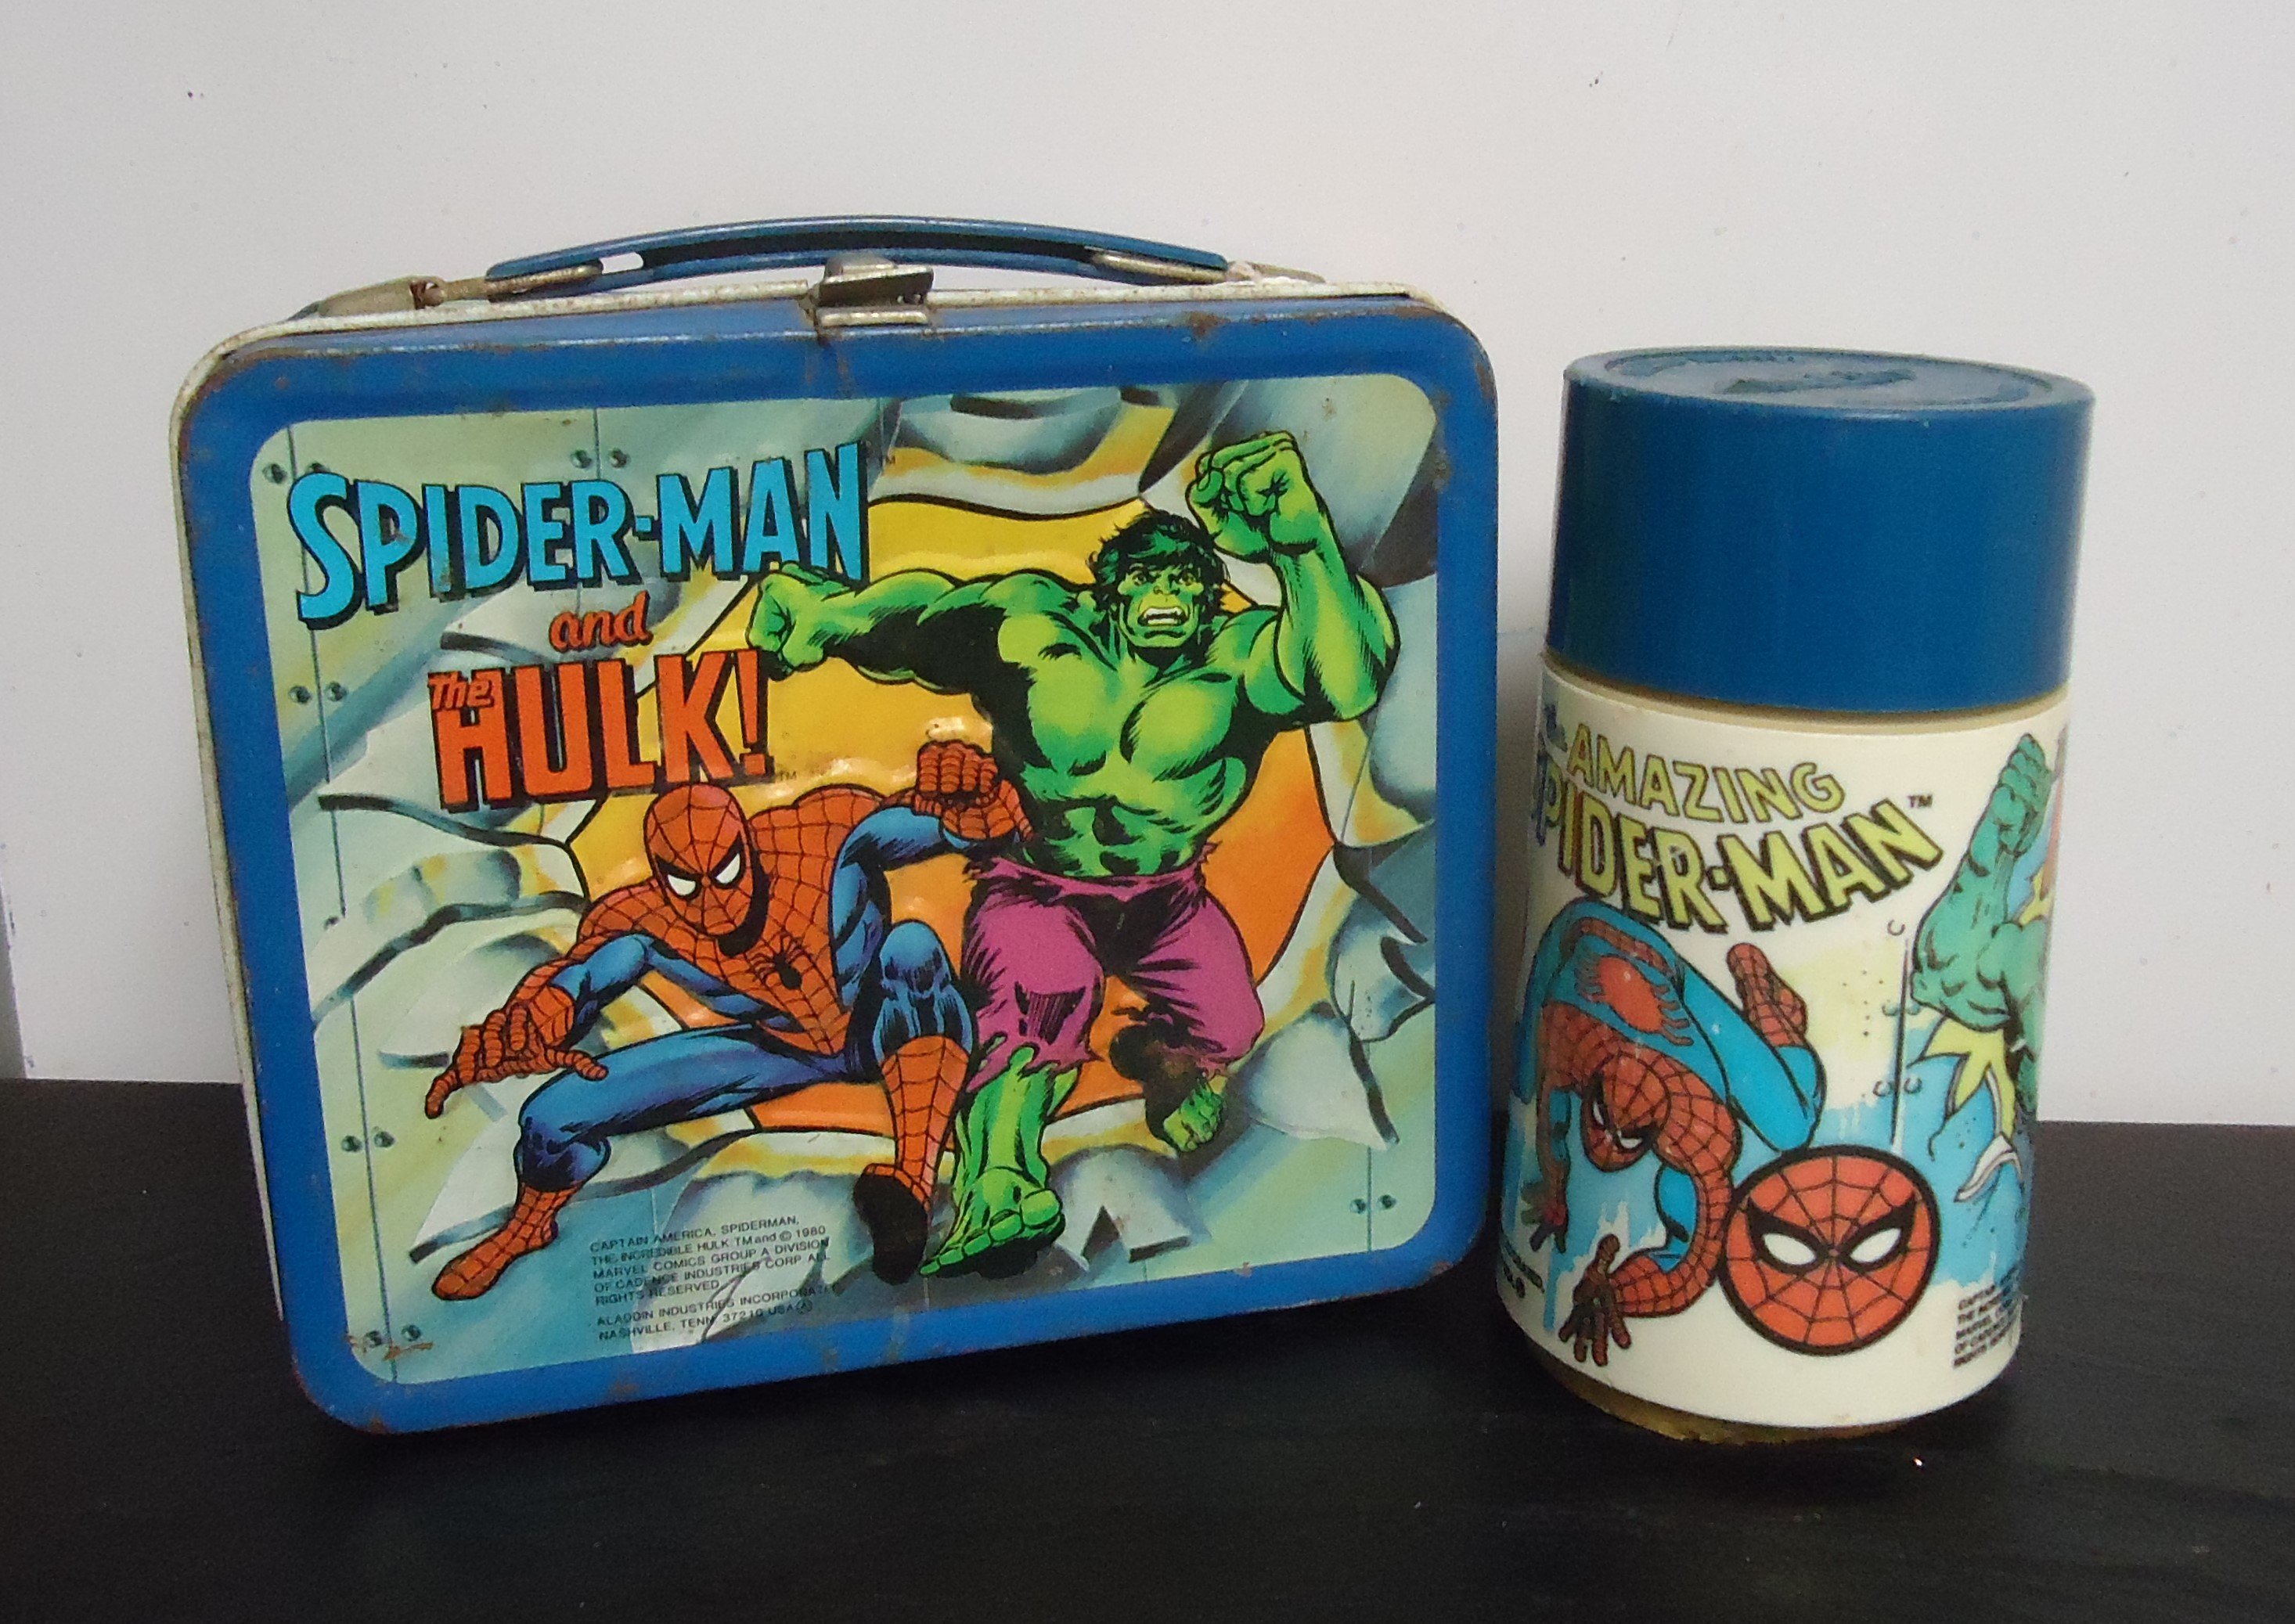 (18)  "1980" Spider-Man & Hulk
Metal Lunch Box W/ Thermos
(Back-Side Captain America)
$35.00